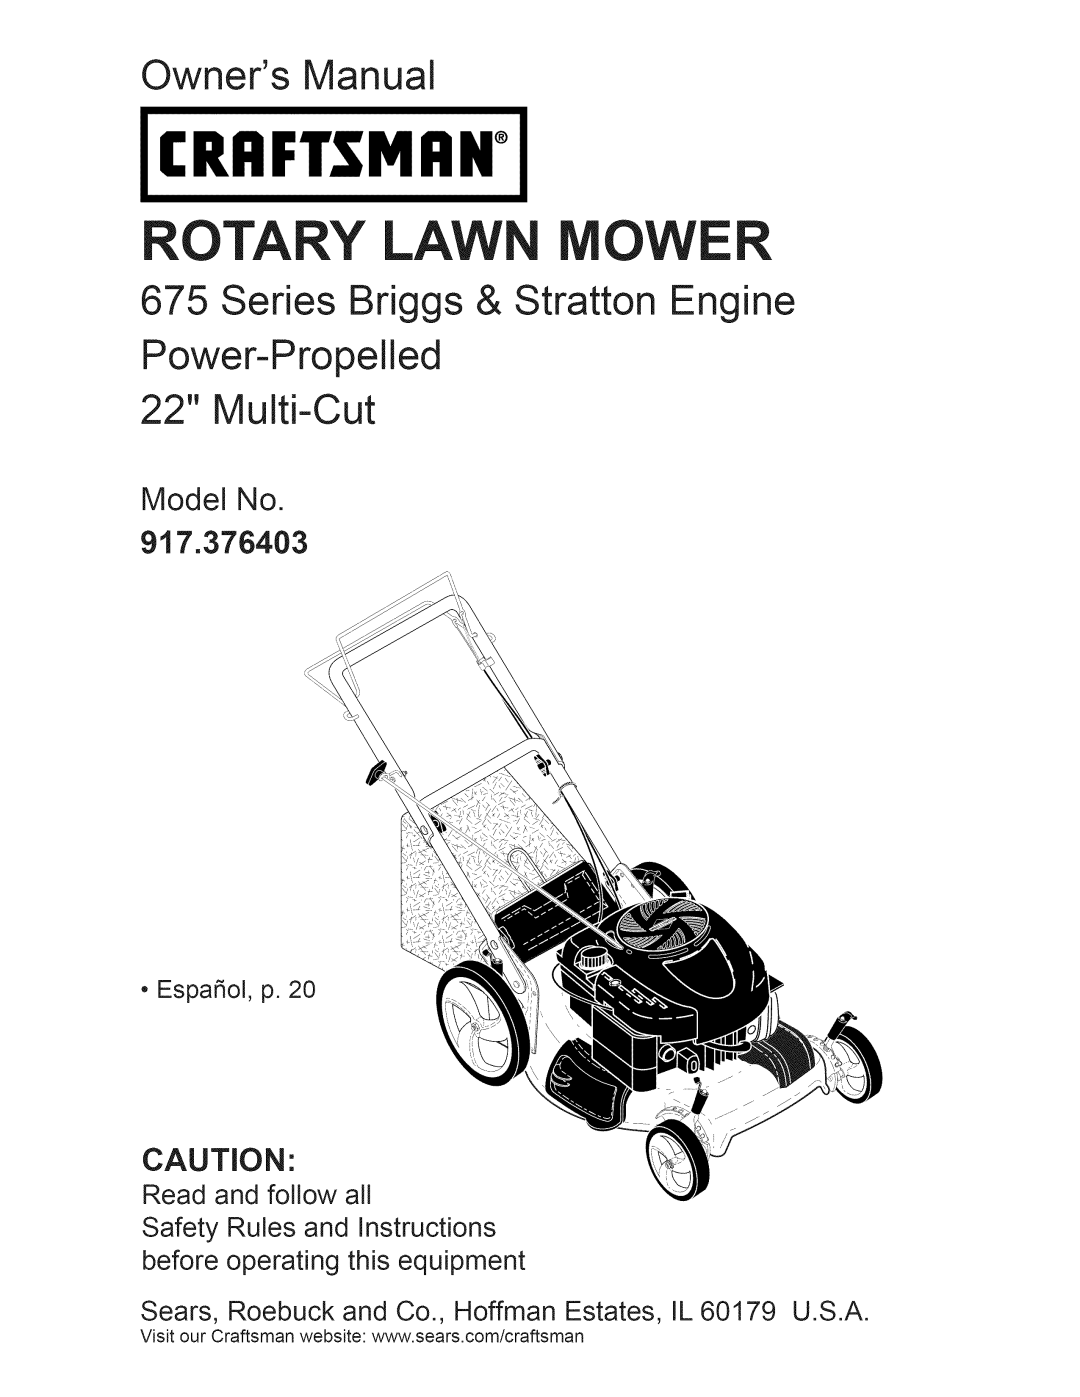 Craftsman manual Model No 917.376403, Craftsman, Rotary Lawn Mower, Owners Manual, Series Briggs & Stratton Engine 